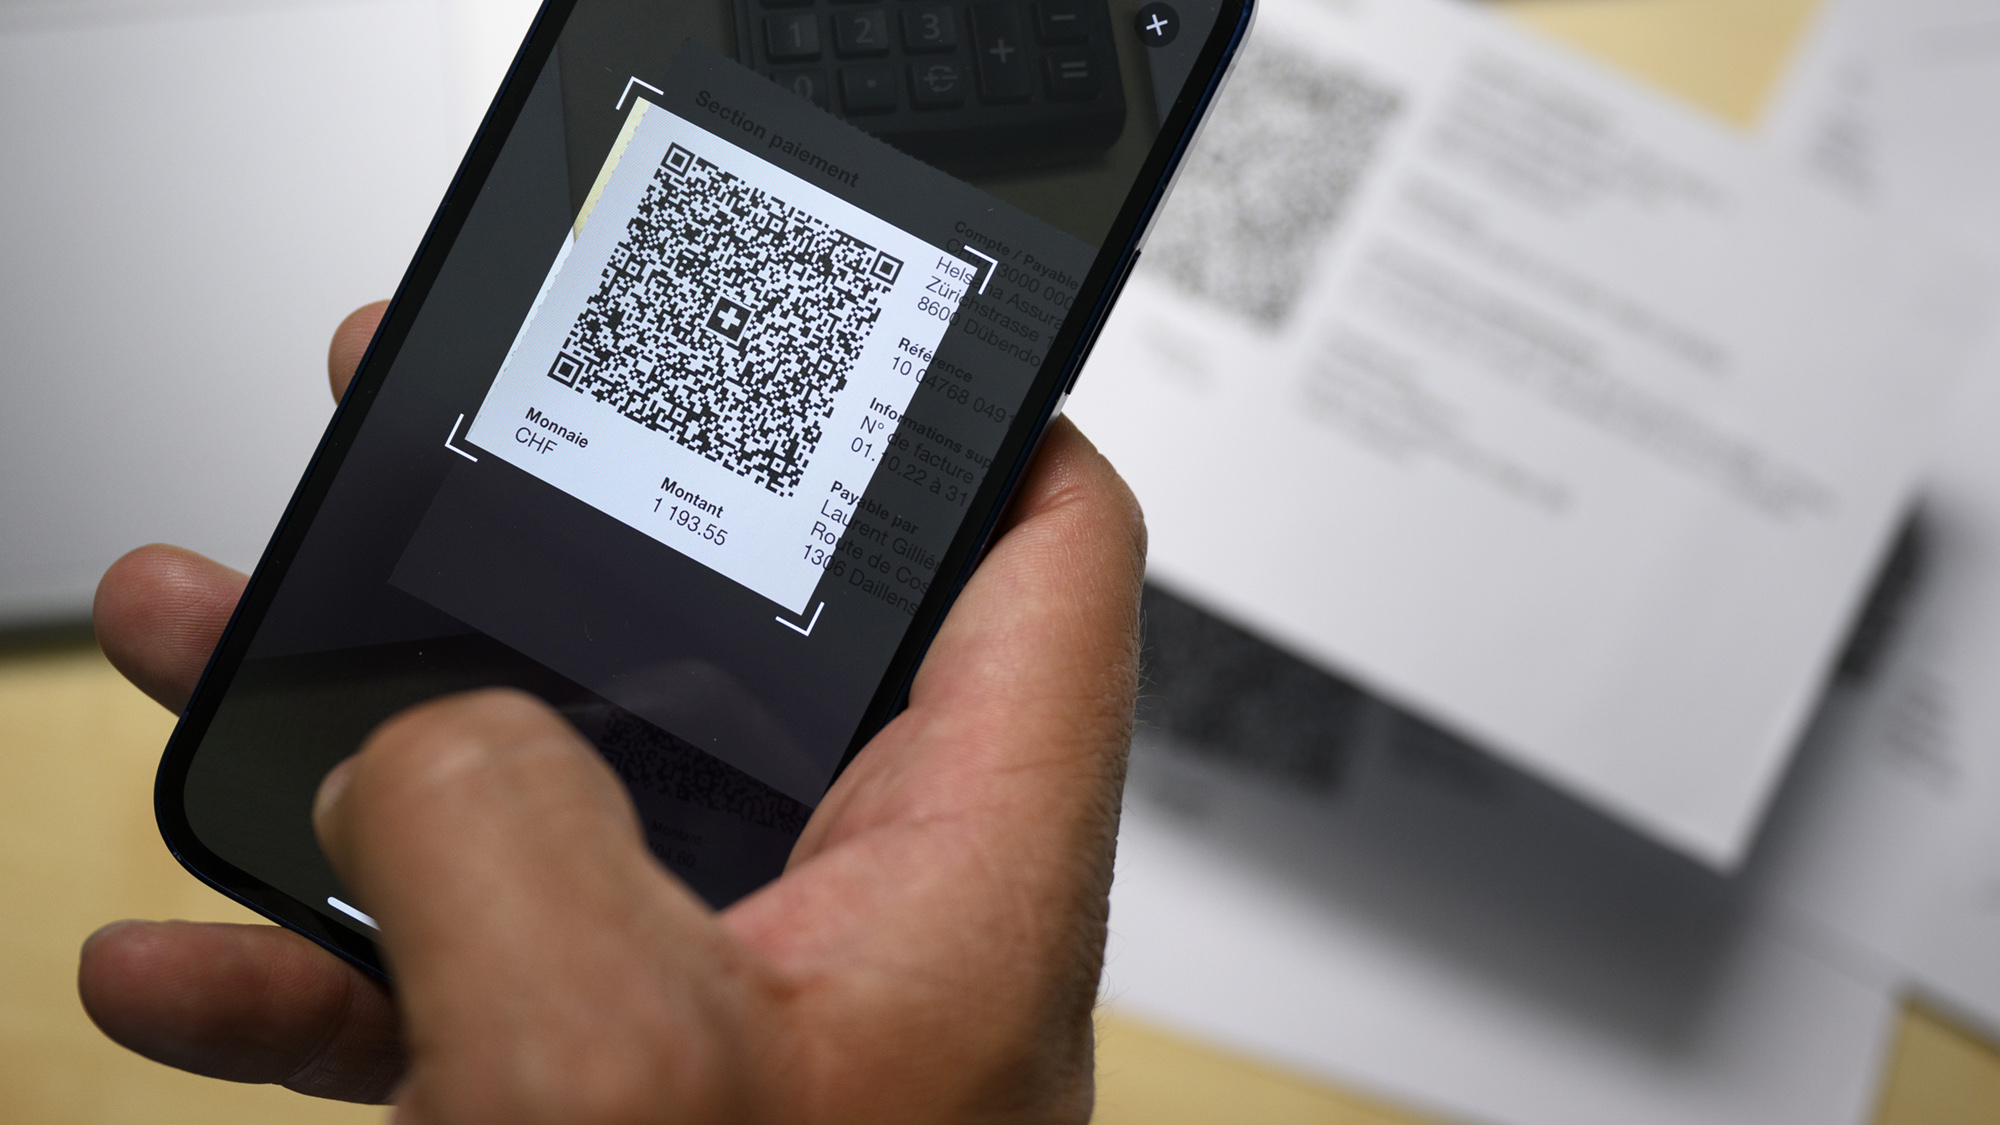 An invoice is scanned with a QR code.